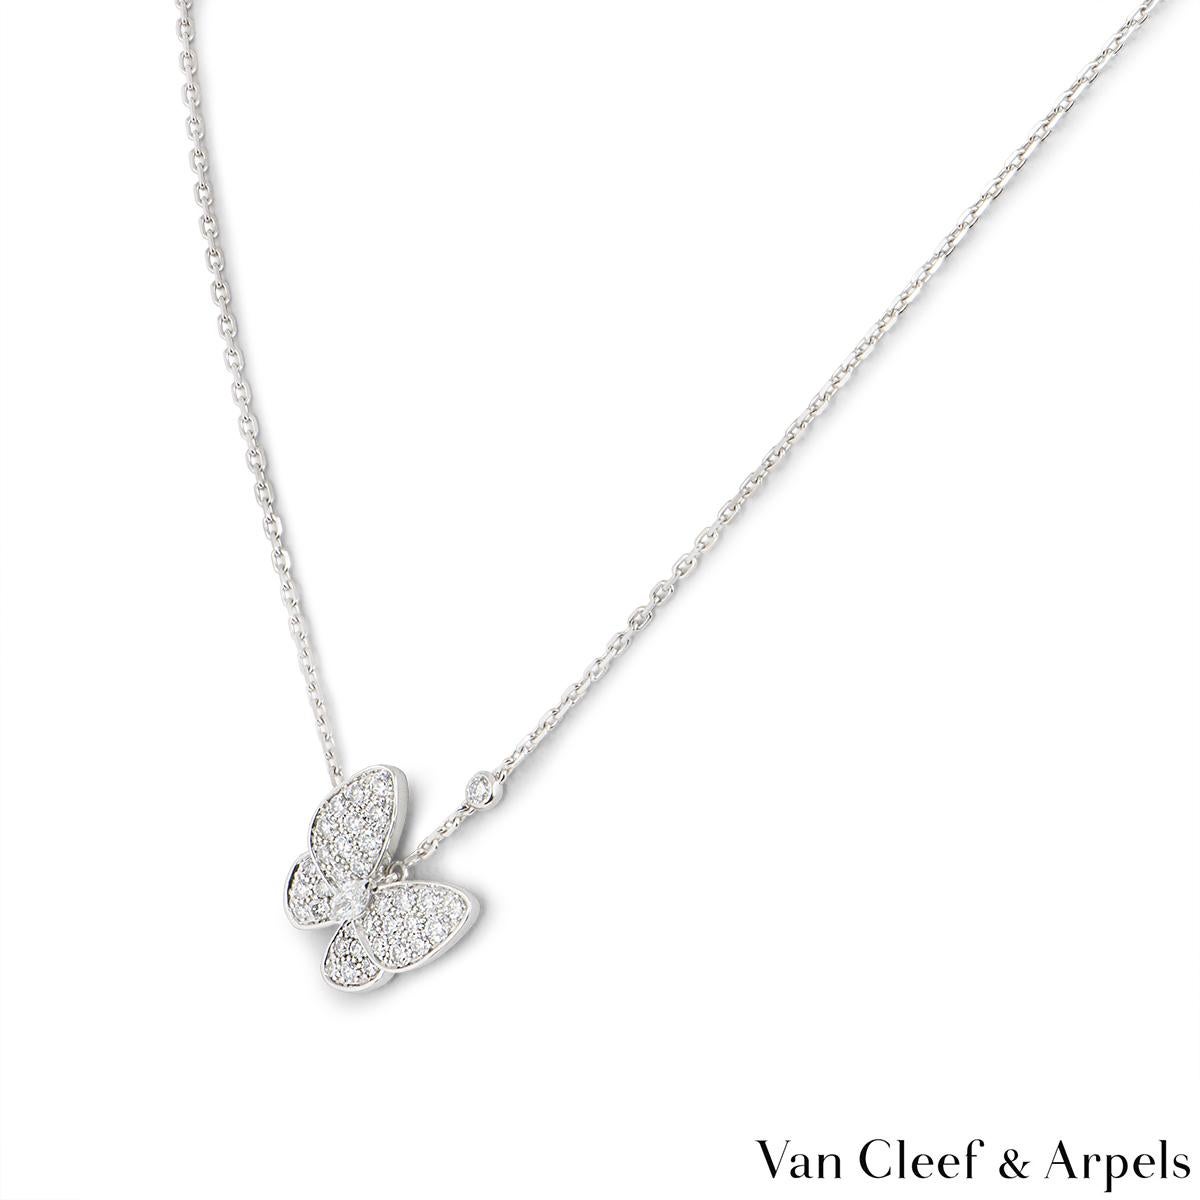 A beautiful 18k white gold pendant from the Fauna Two Butterfly collection by Van Cleef & Arpels. The pendant features a Butterfly motif with 34 pave set round brilliant cut diamonds and a single marquise cut diamond in the centre. There is also a